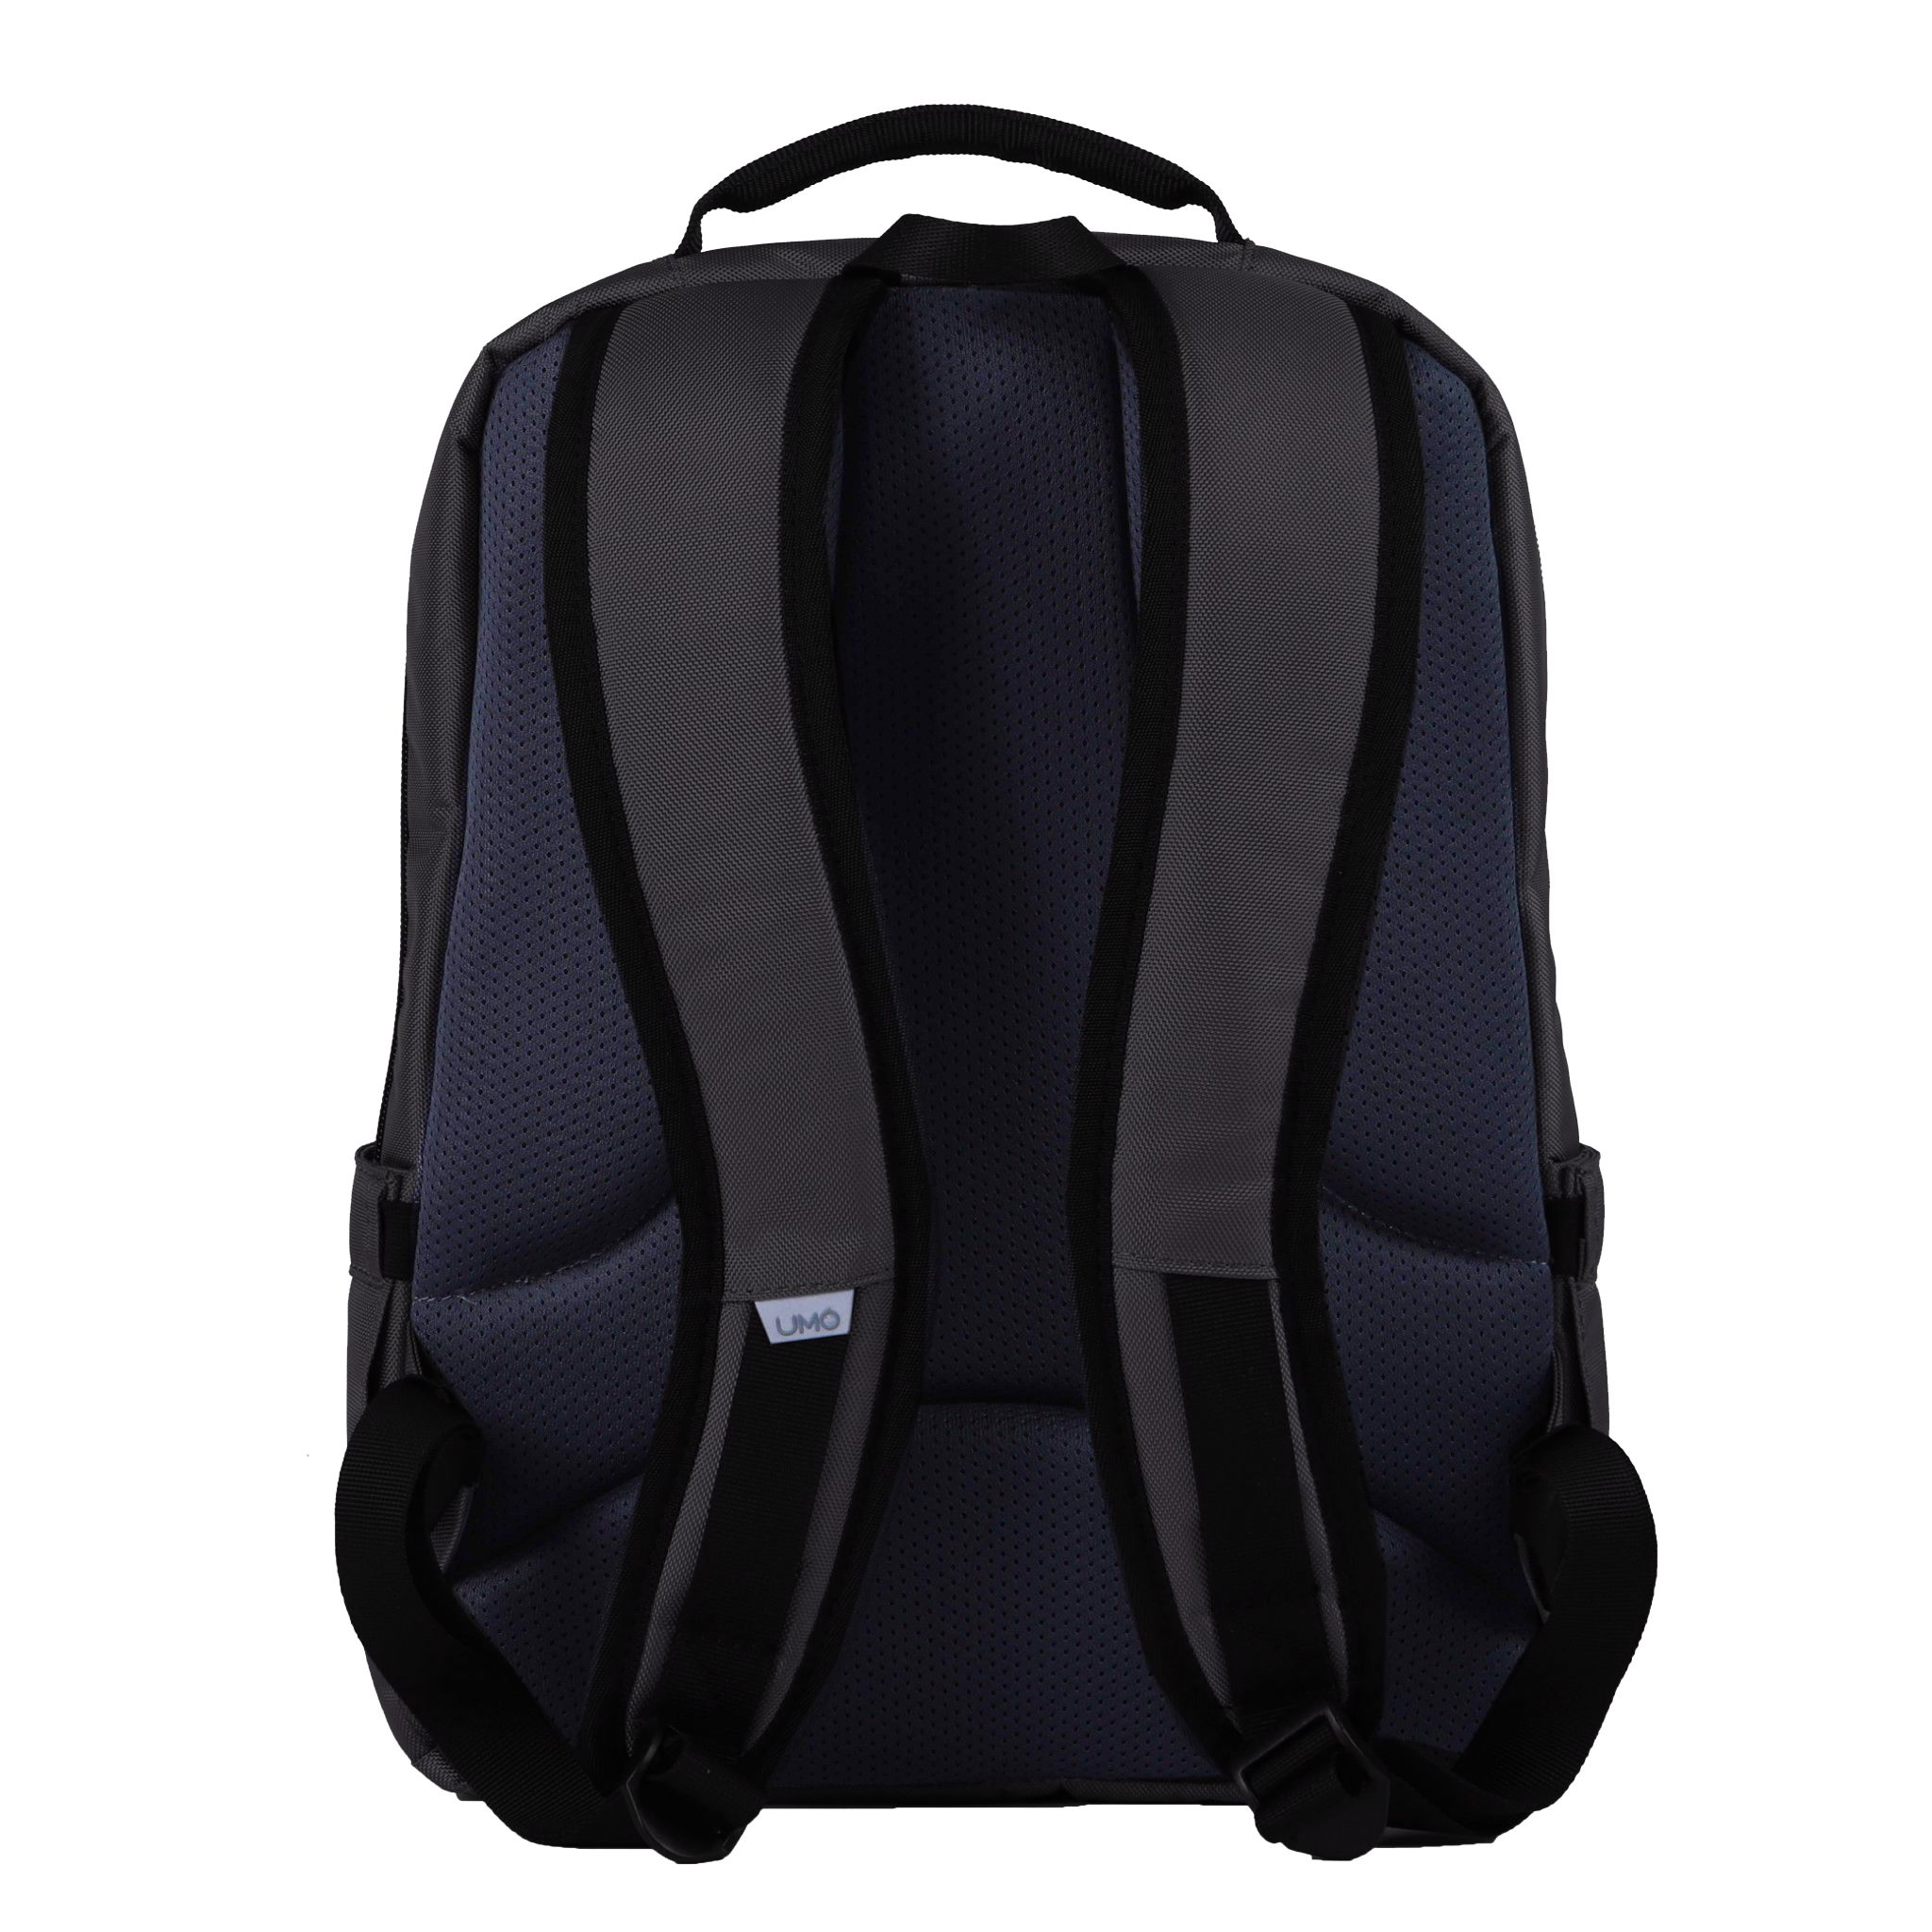  UMO TANO BackPack D.Grey- Balo Laptop Cao Cấp 